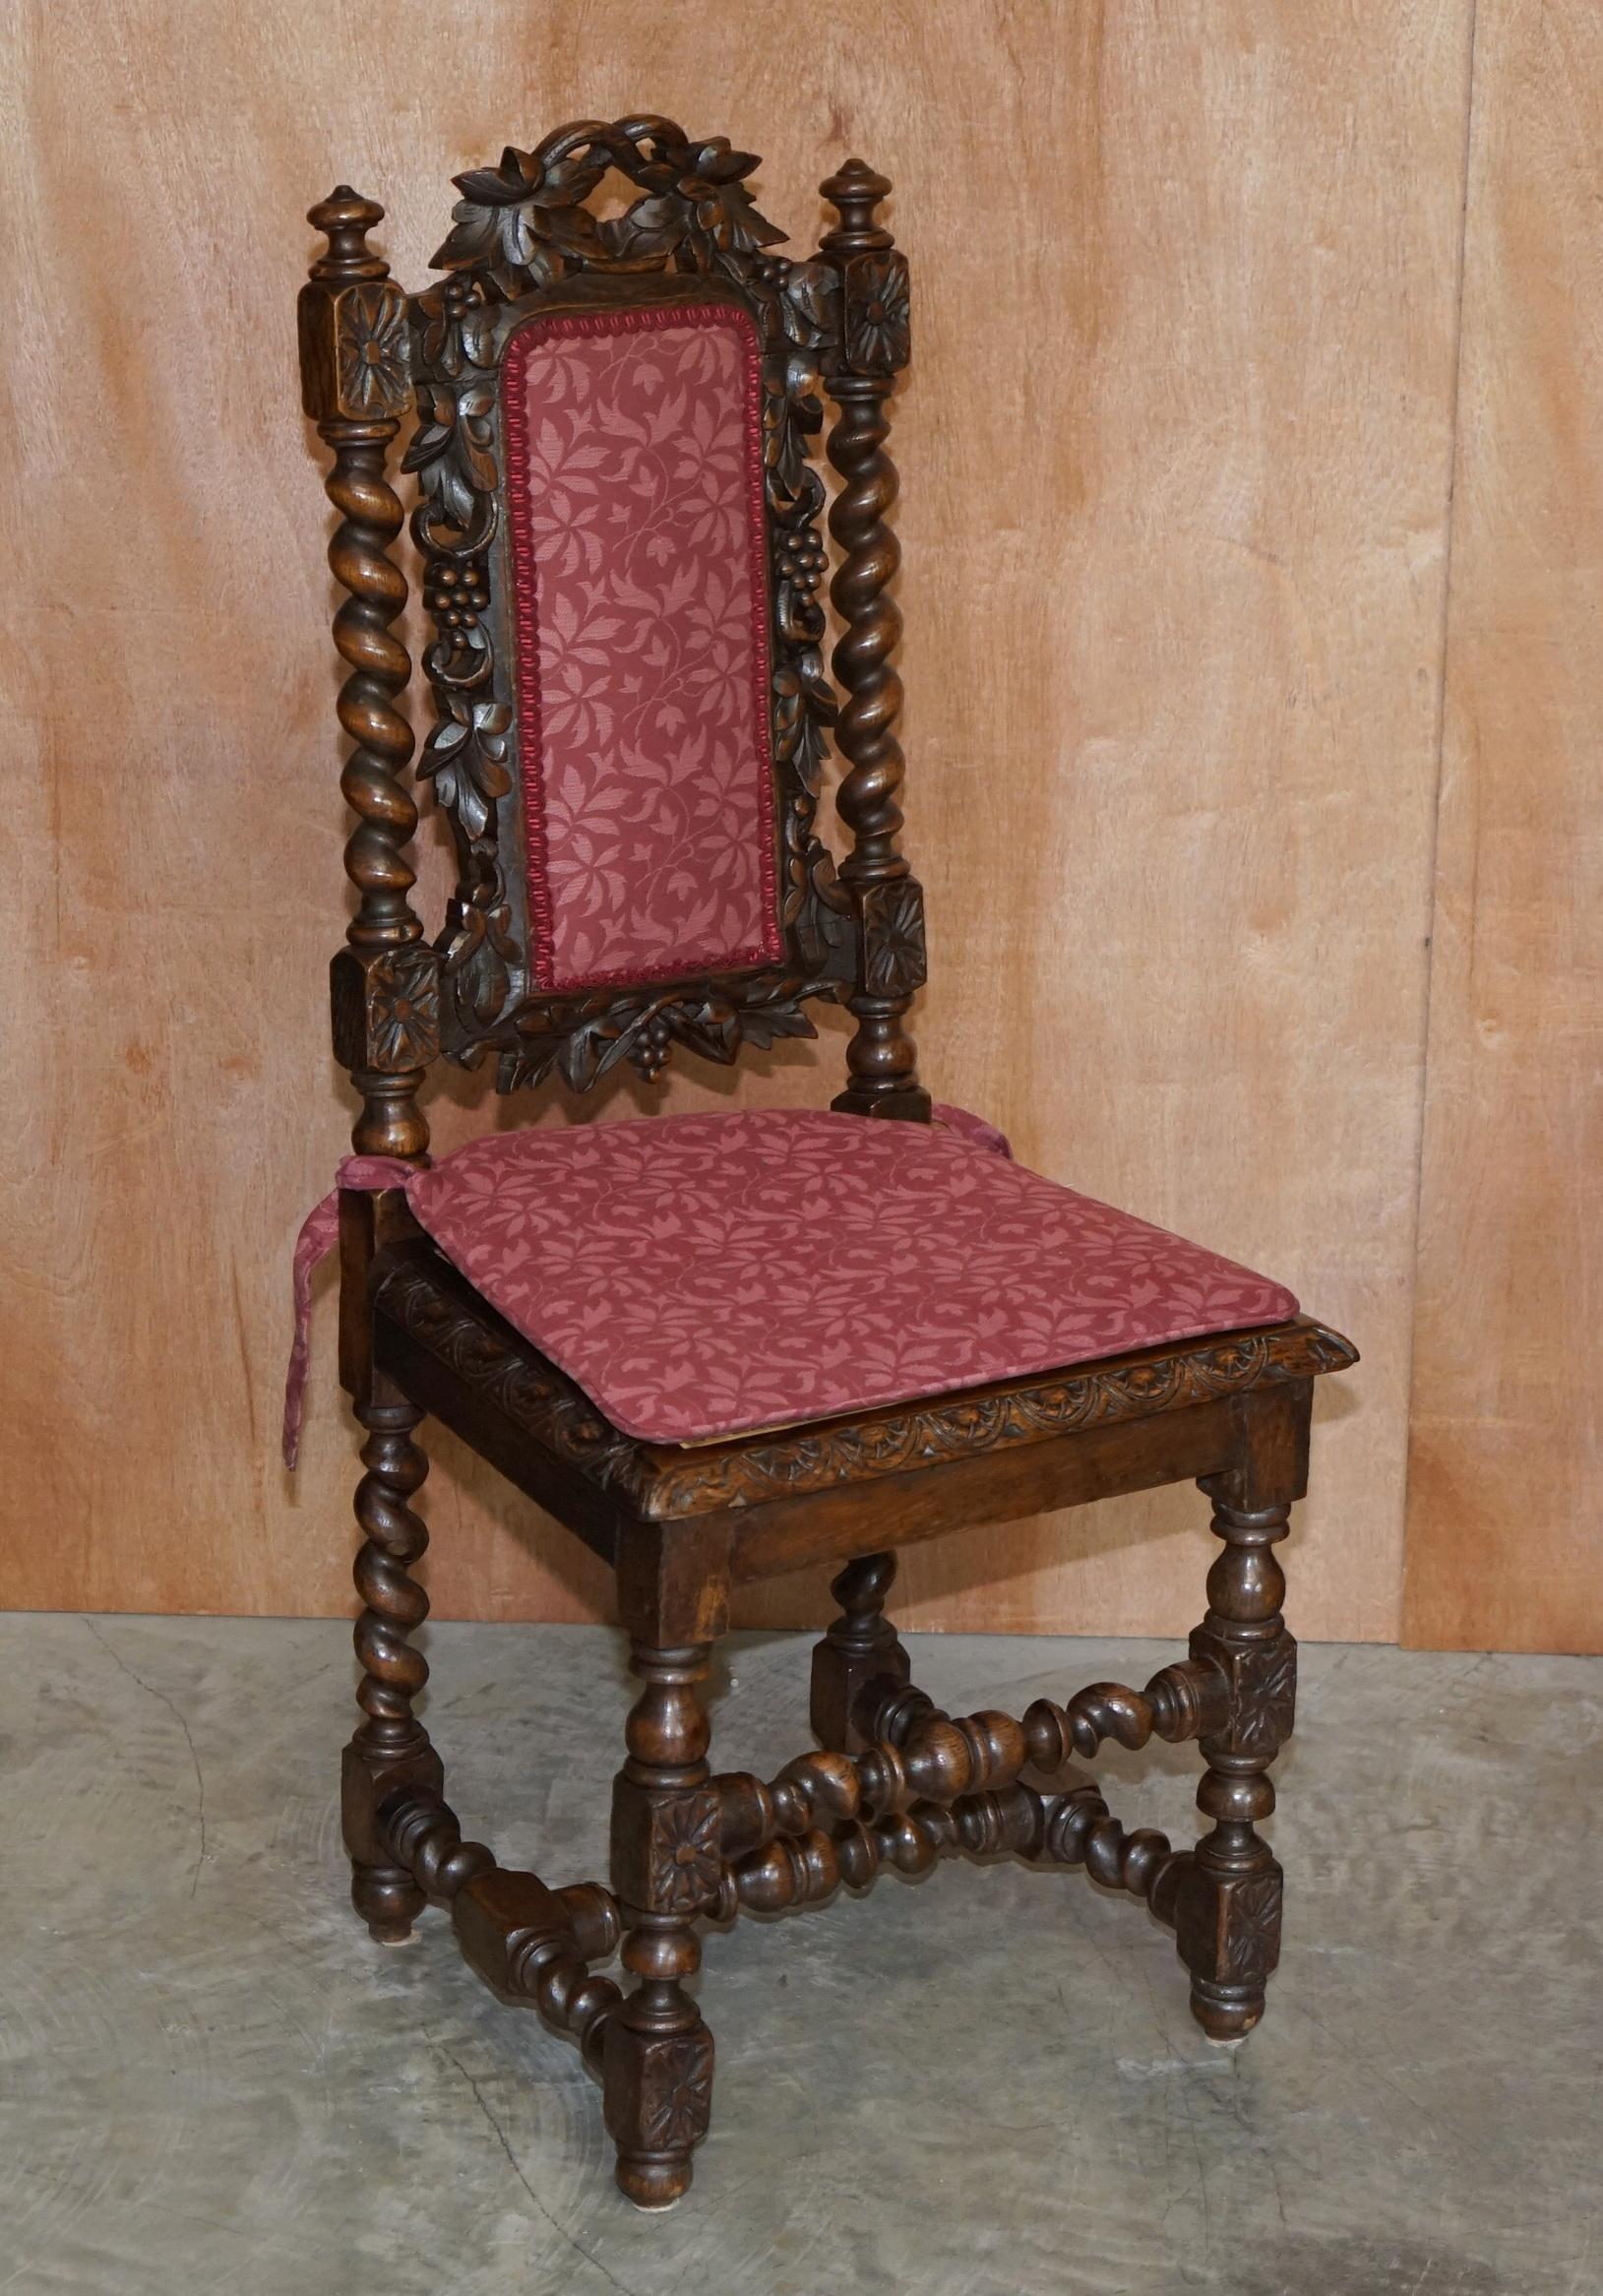 We are delighted to offer for sale this lovely suite of four Antique Victorian circa 1860-1880 hand carved English oak dining chairs with rattan seat bases and horse hair filled seat pad covers

A good looking, decorative and well made suite,